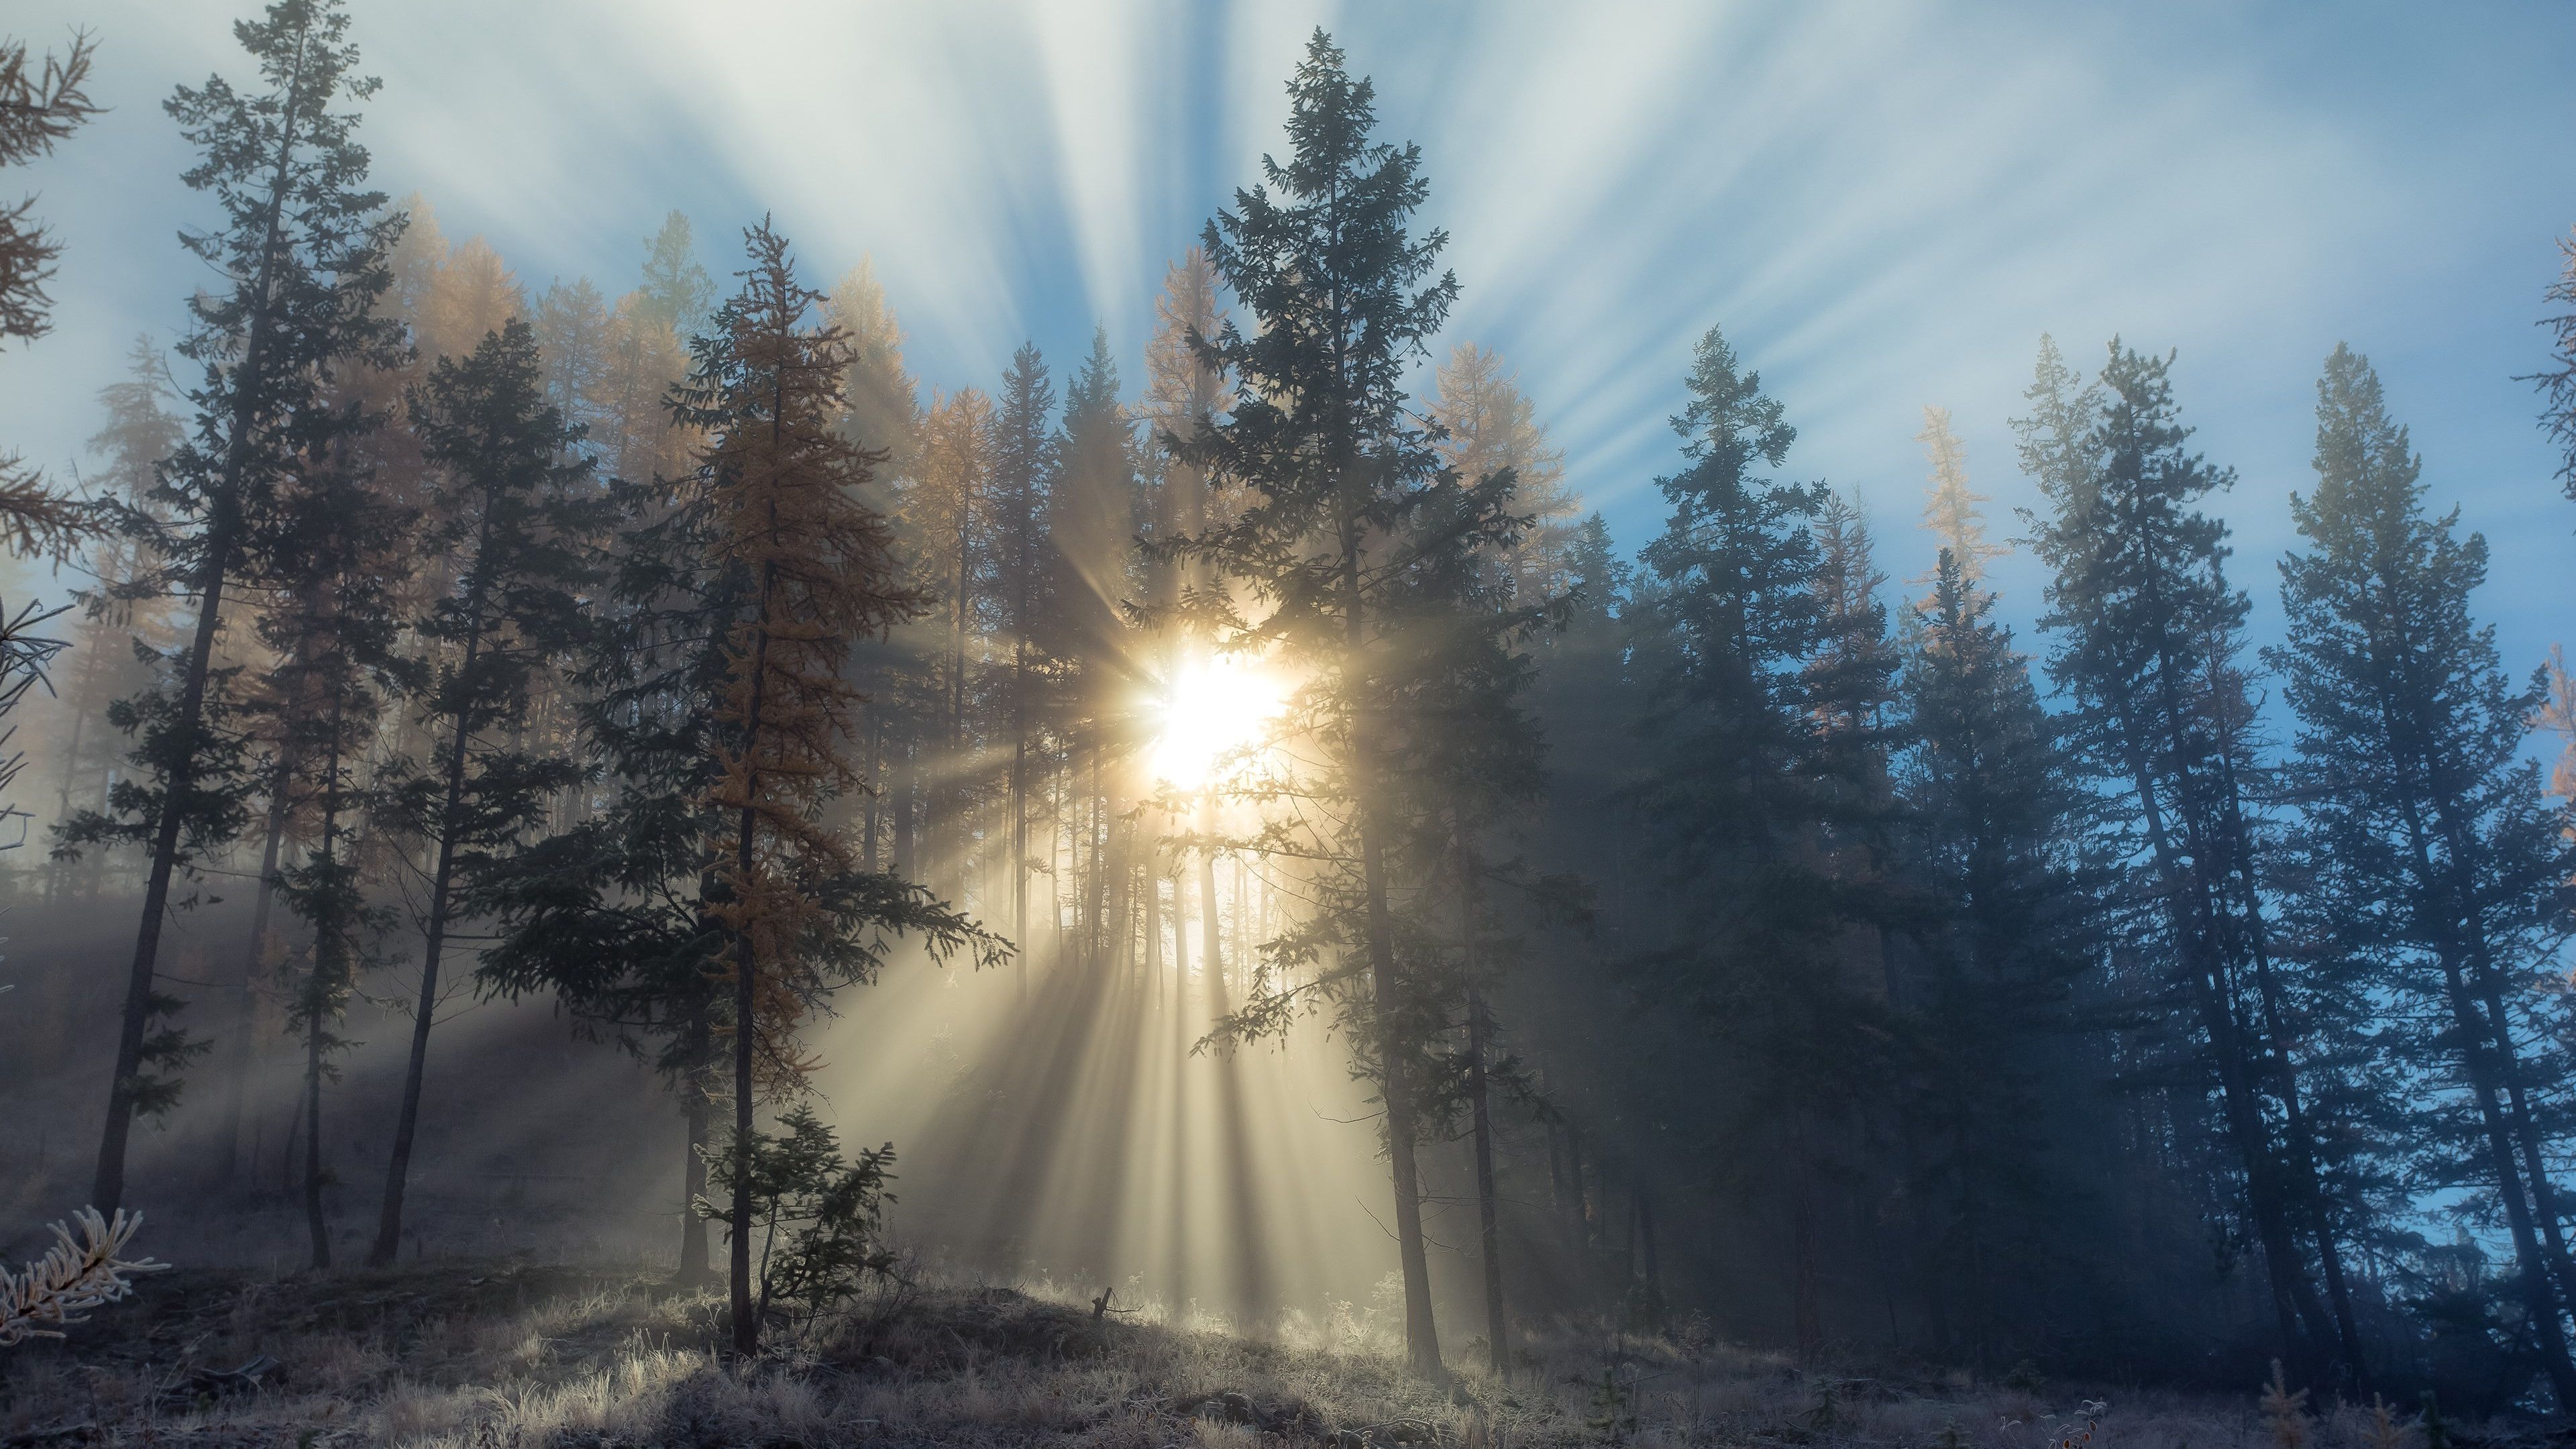 Download wallpaper: Sun rays through forest trees 3840x2160